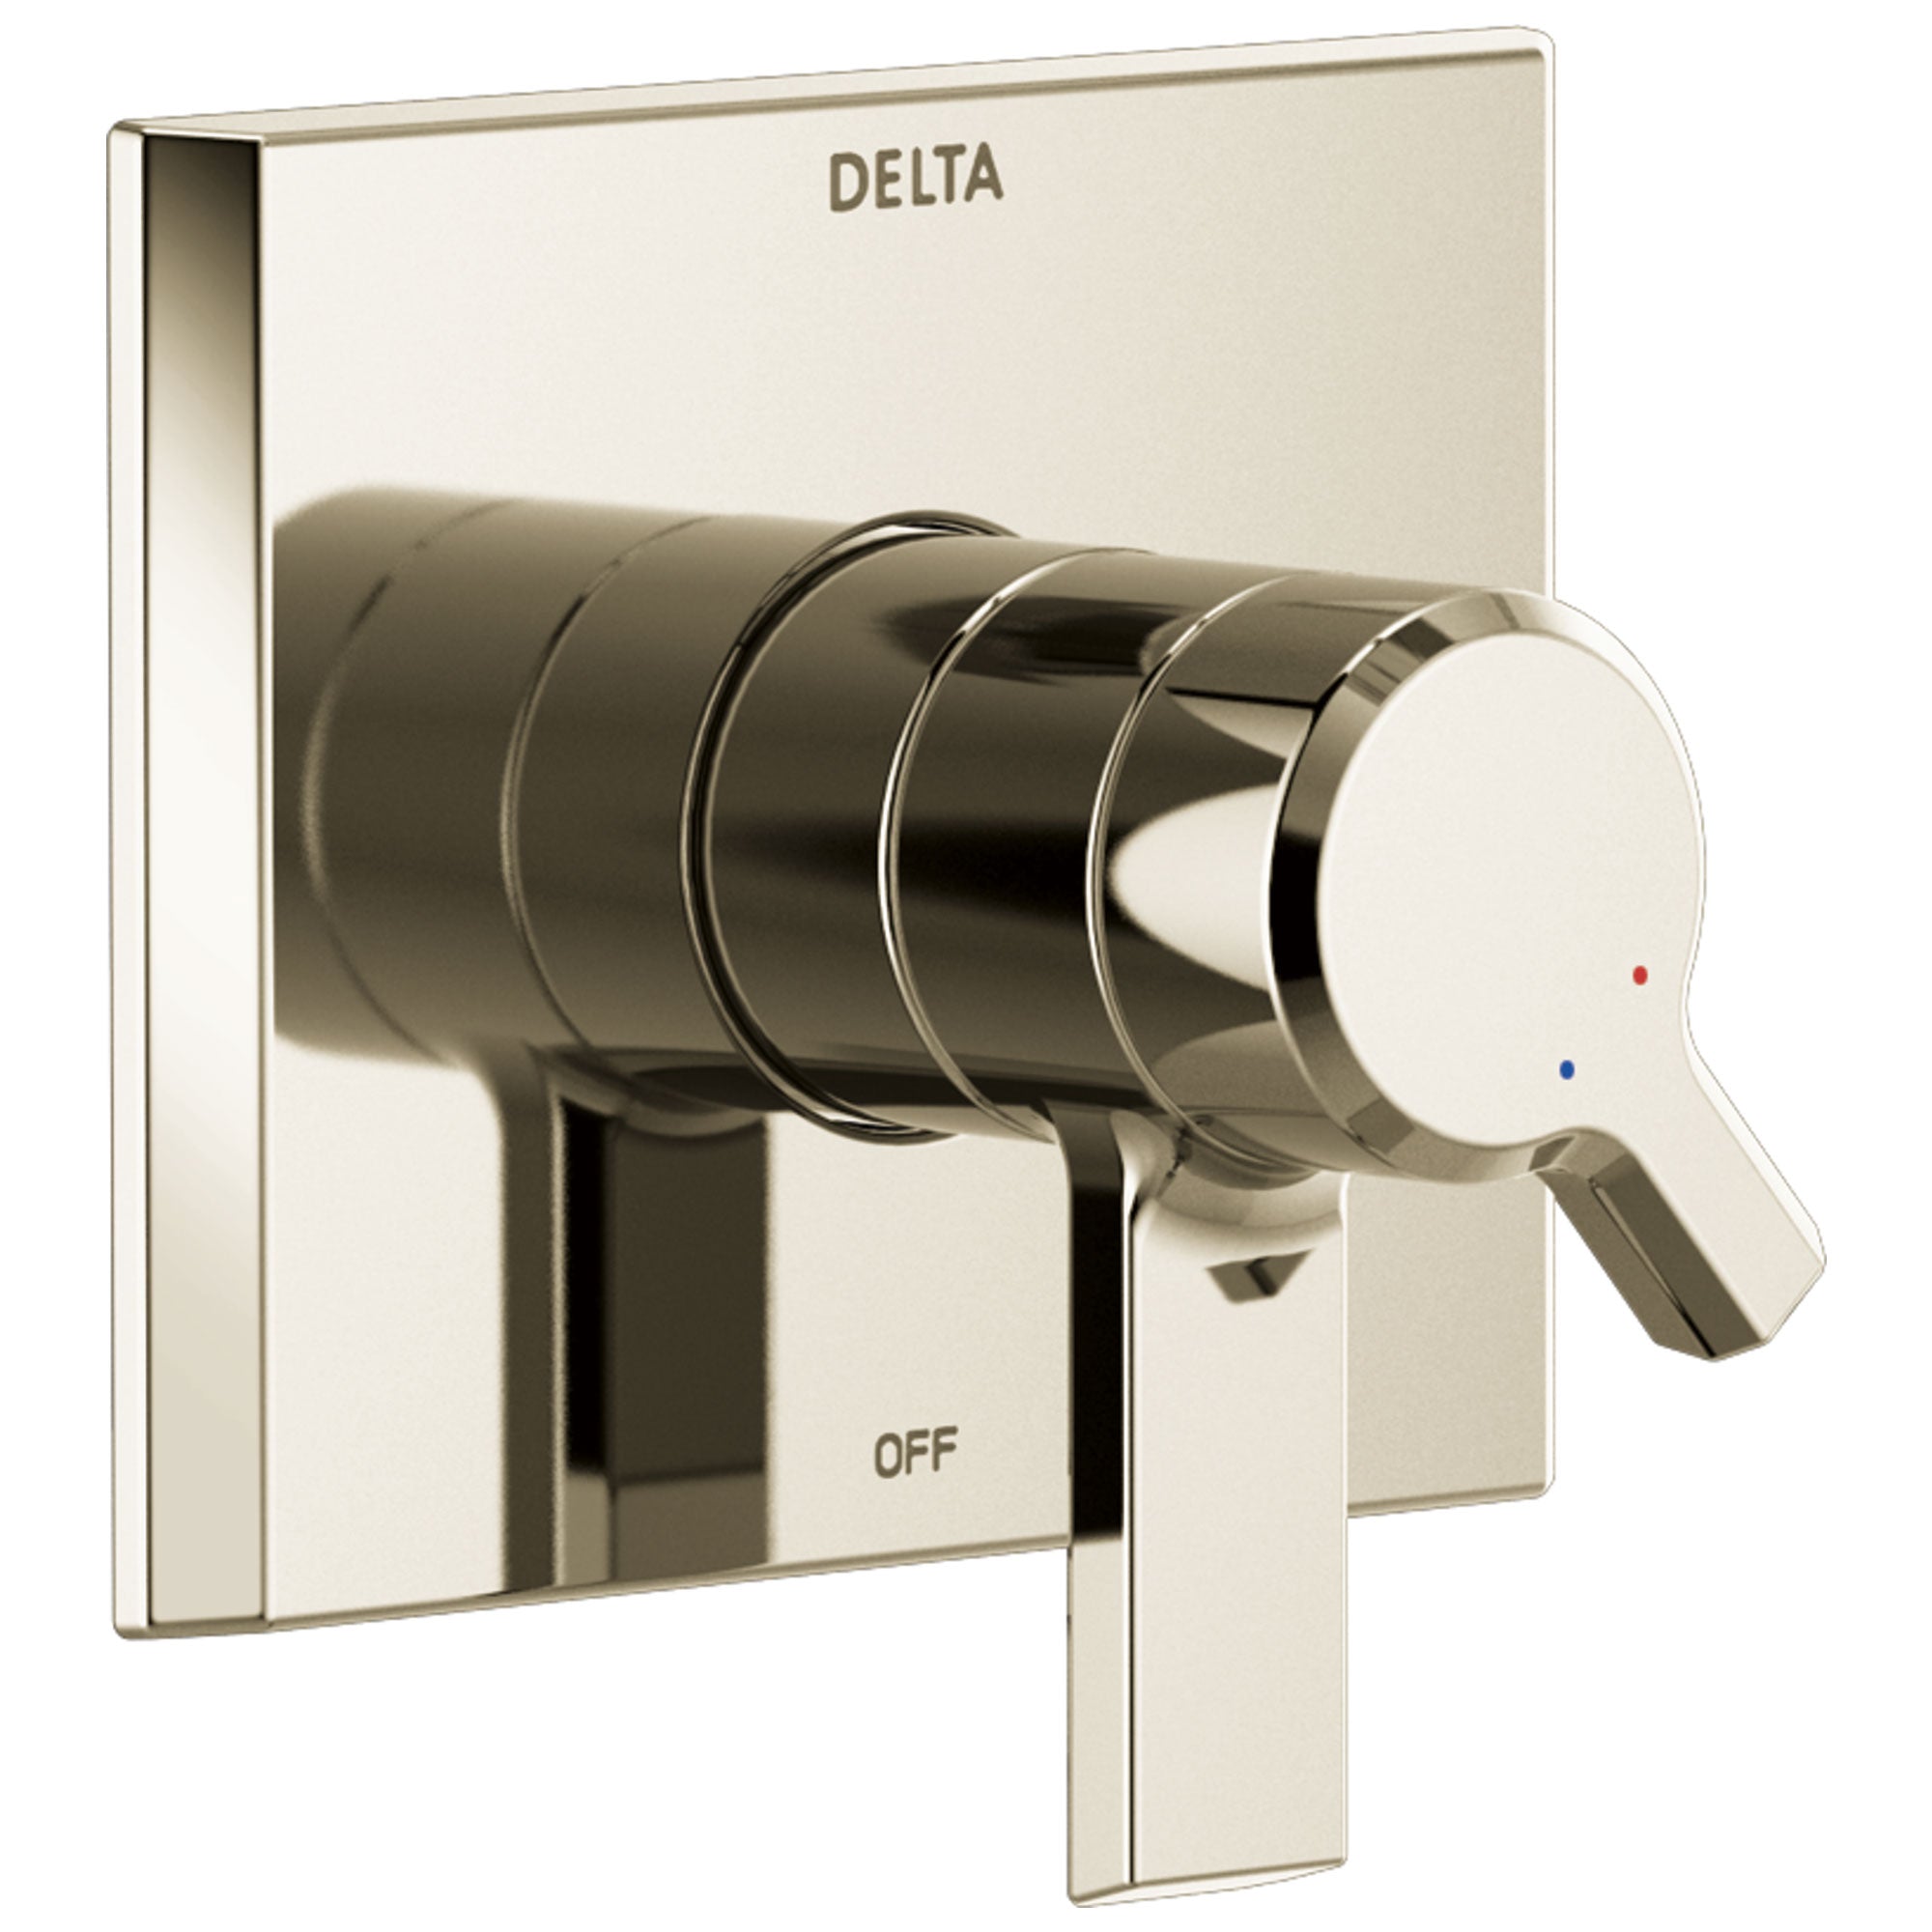 Delta Pivotal Polished Nickel Finish Monitor 17 Series Shower Faucet Control Only Trim Kit (Requires Valve) DT17099PN